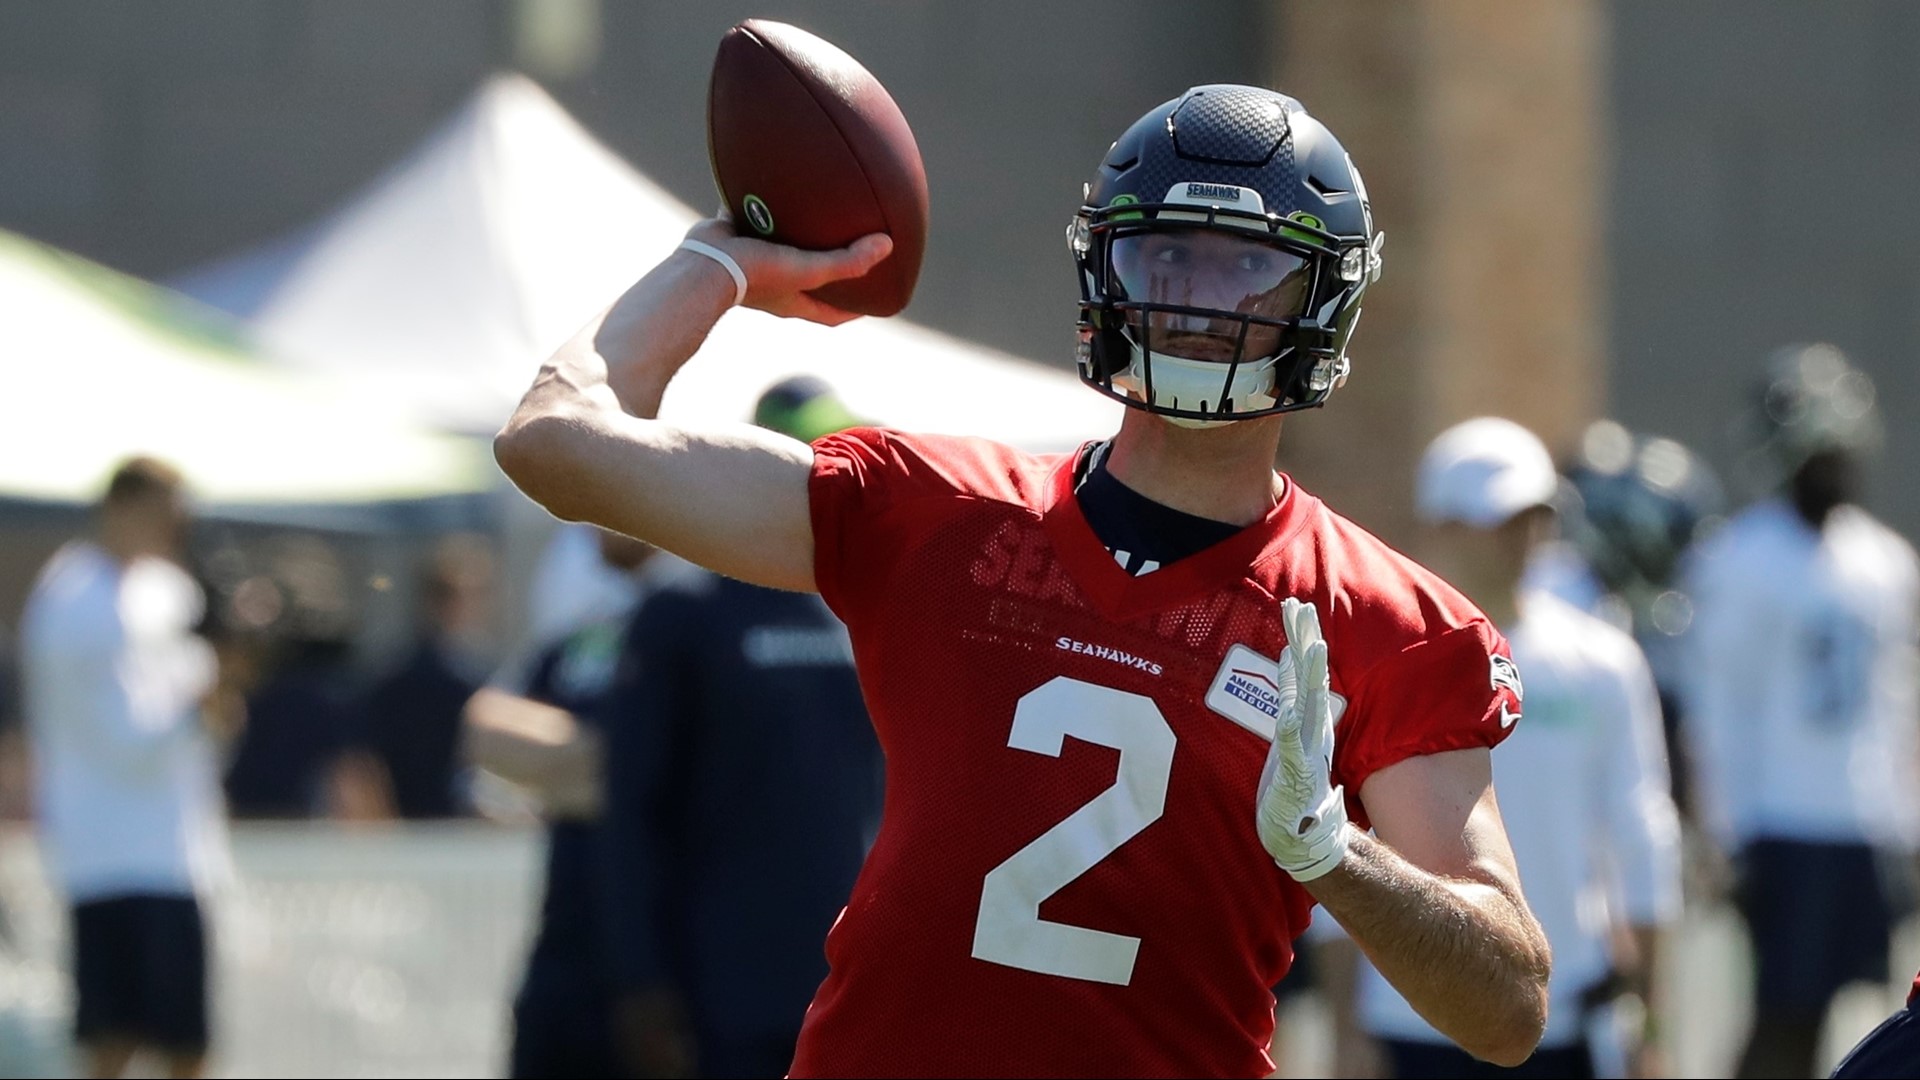 Rookie Seahawks are expected to carry the team during the preseason game against the Broncos.